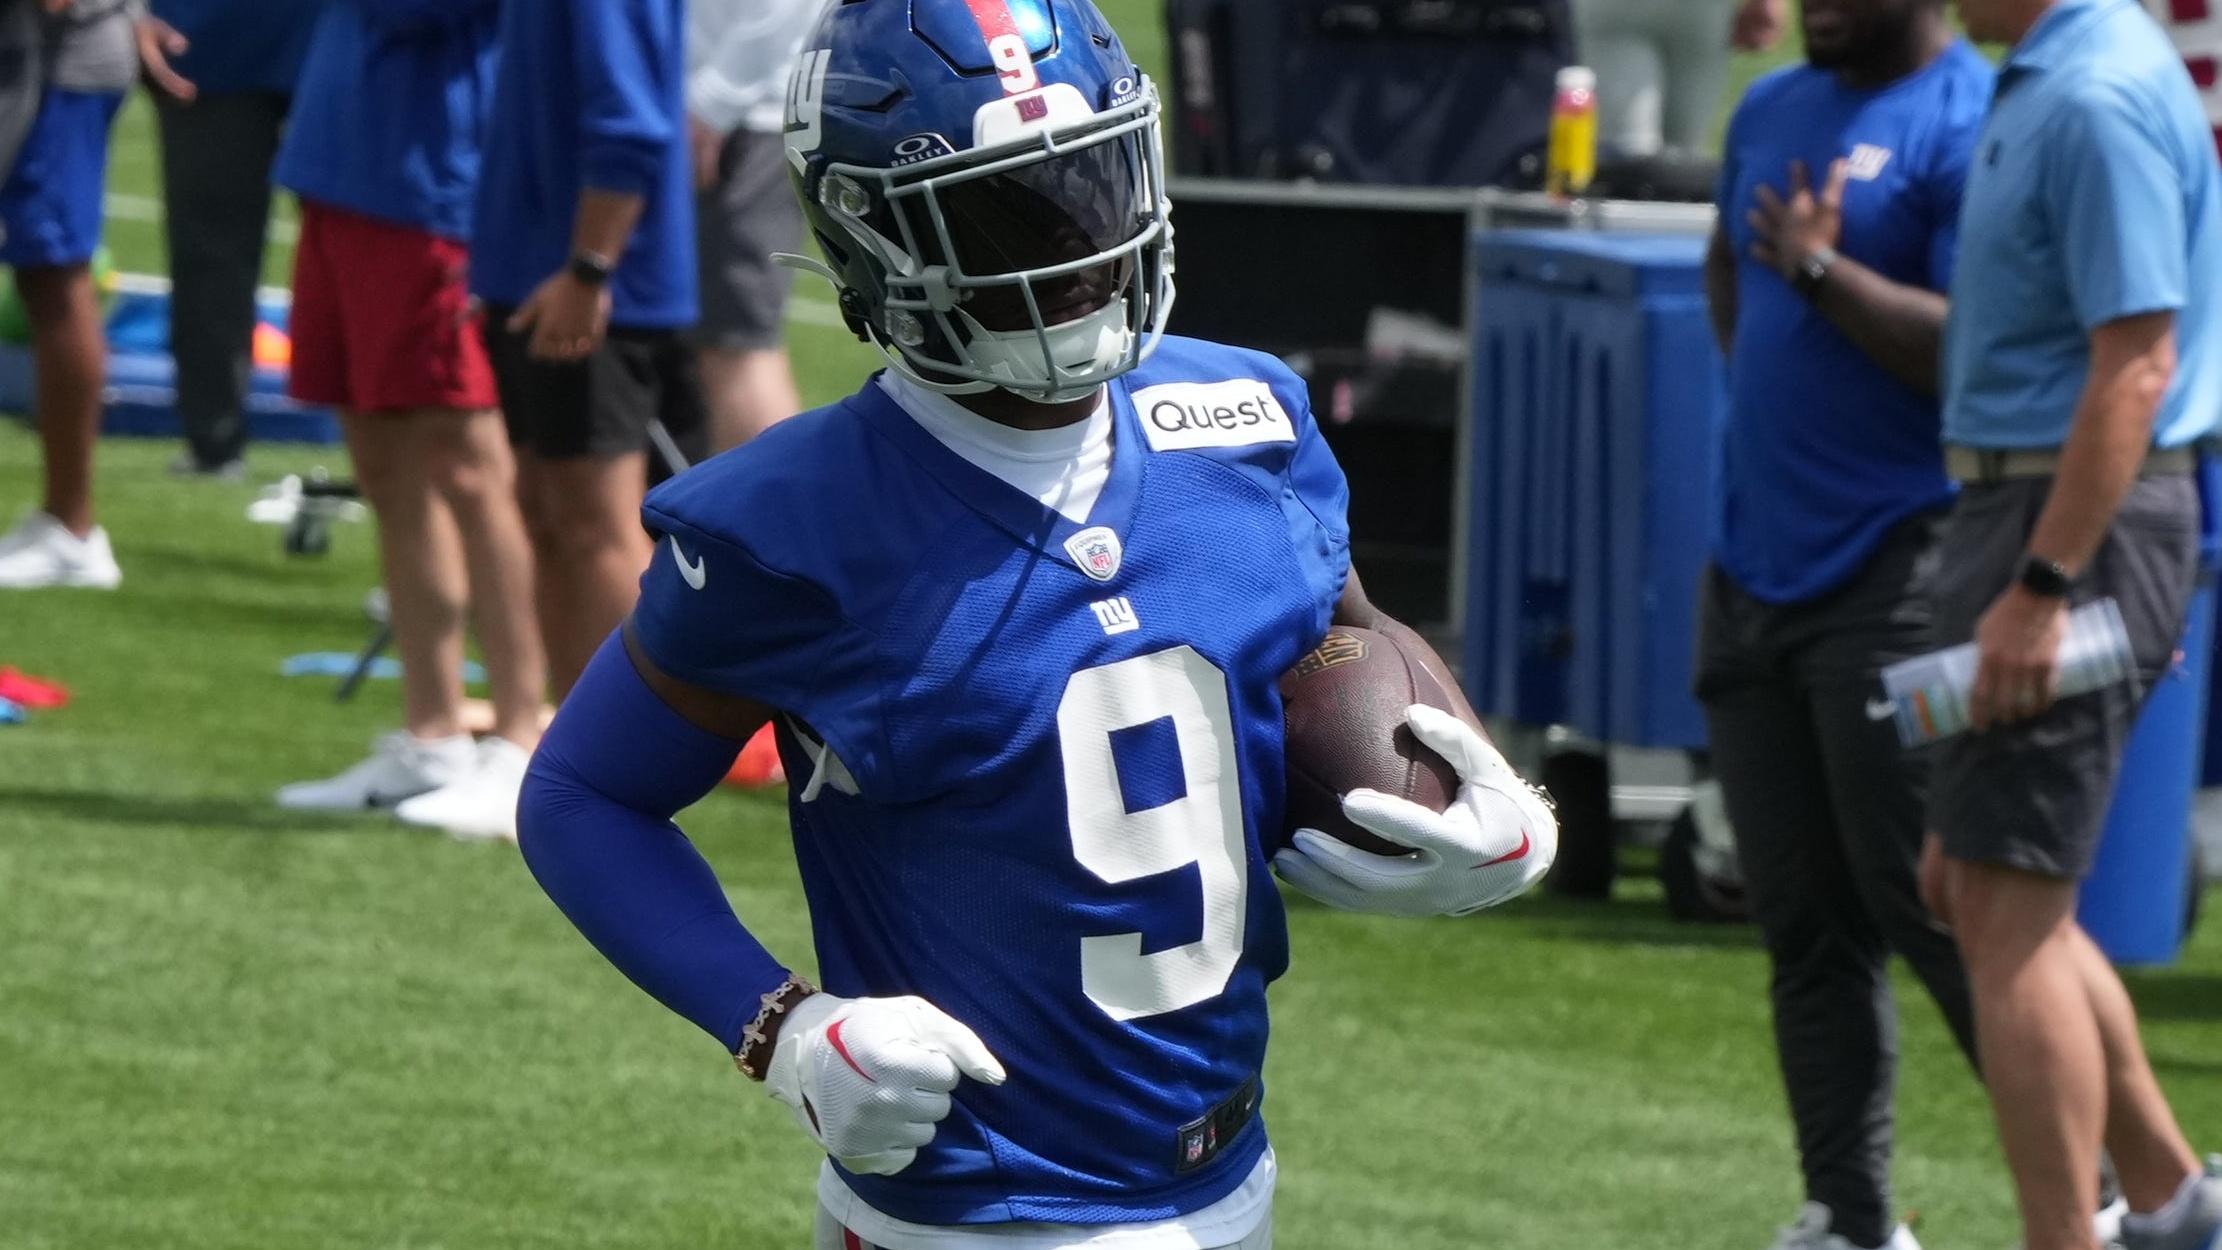 Wide receiver Malik Nabers at the NY Giants Mandatory Minicamp at their practice facility in East Rutherford, NJ.